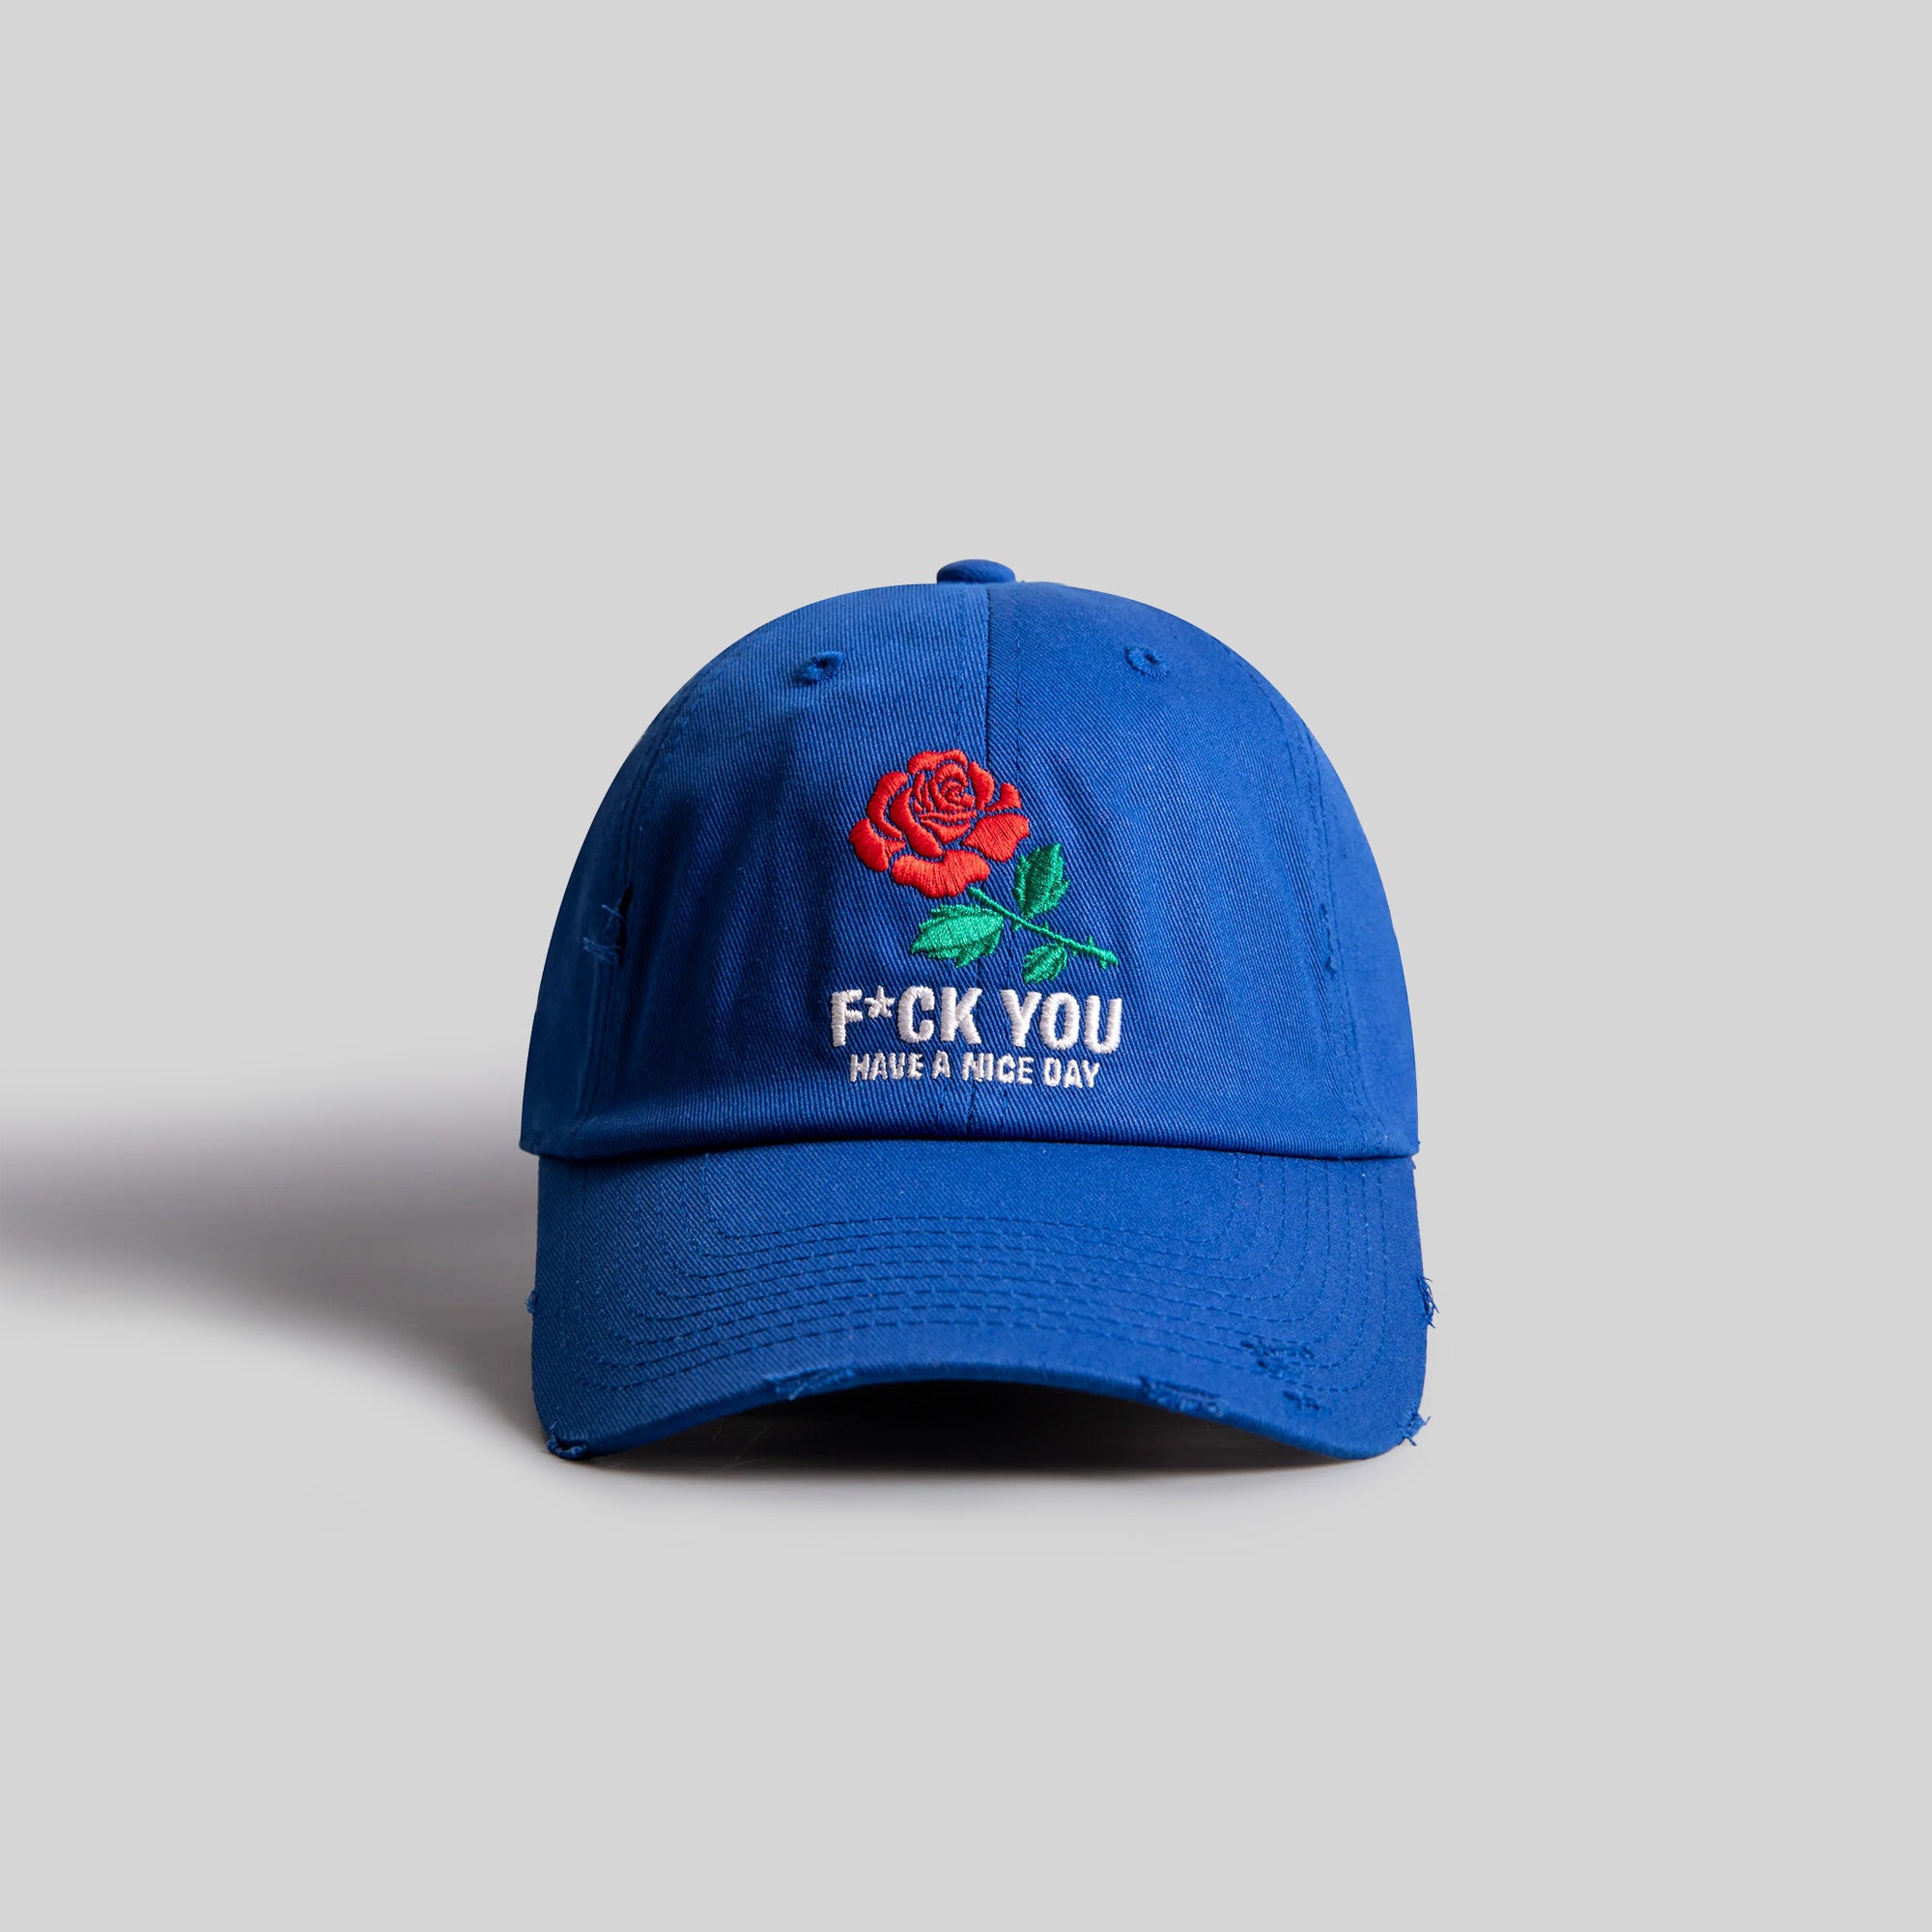 HAVE A NICE DAY ROYAL BLUE RELAXED FIT DISTRESSED HAT